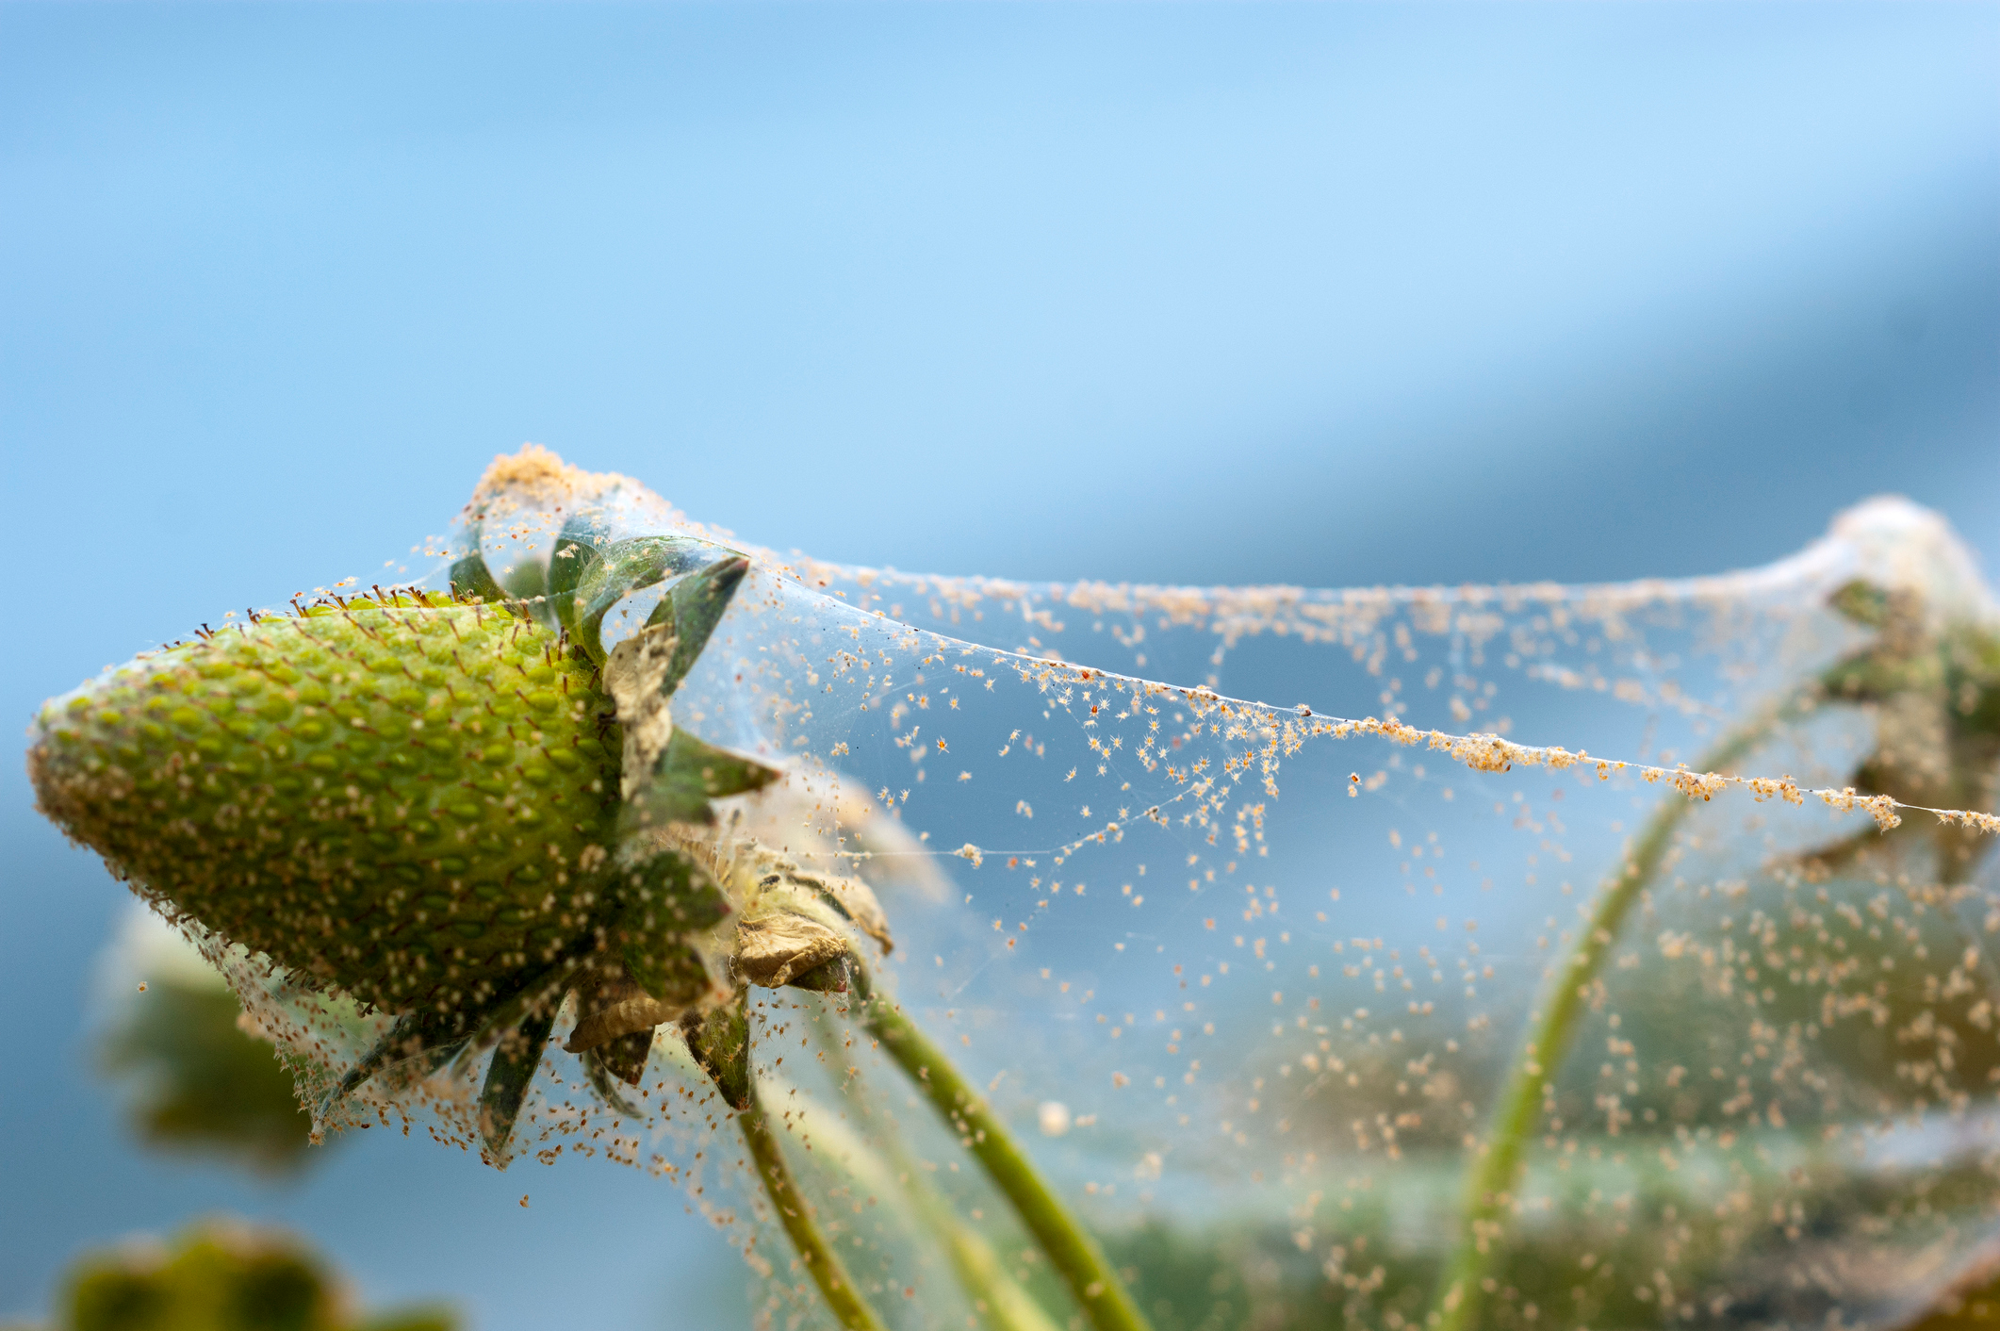 How to Get Rid of Spider and Outdoor Plants